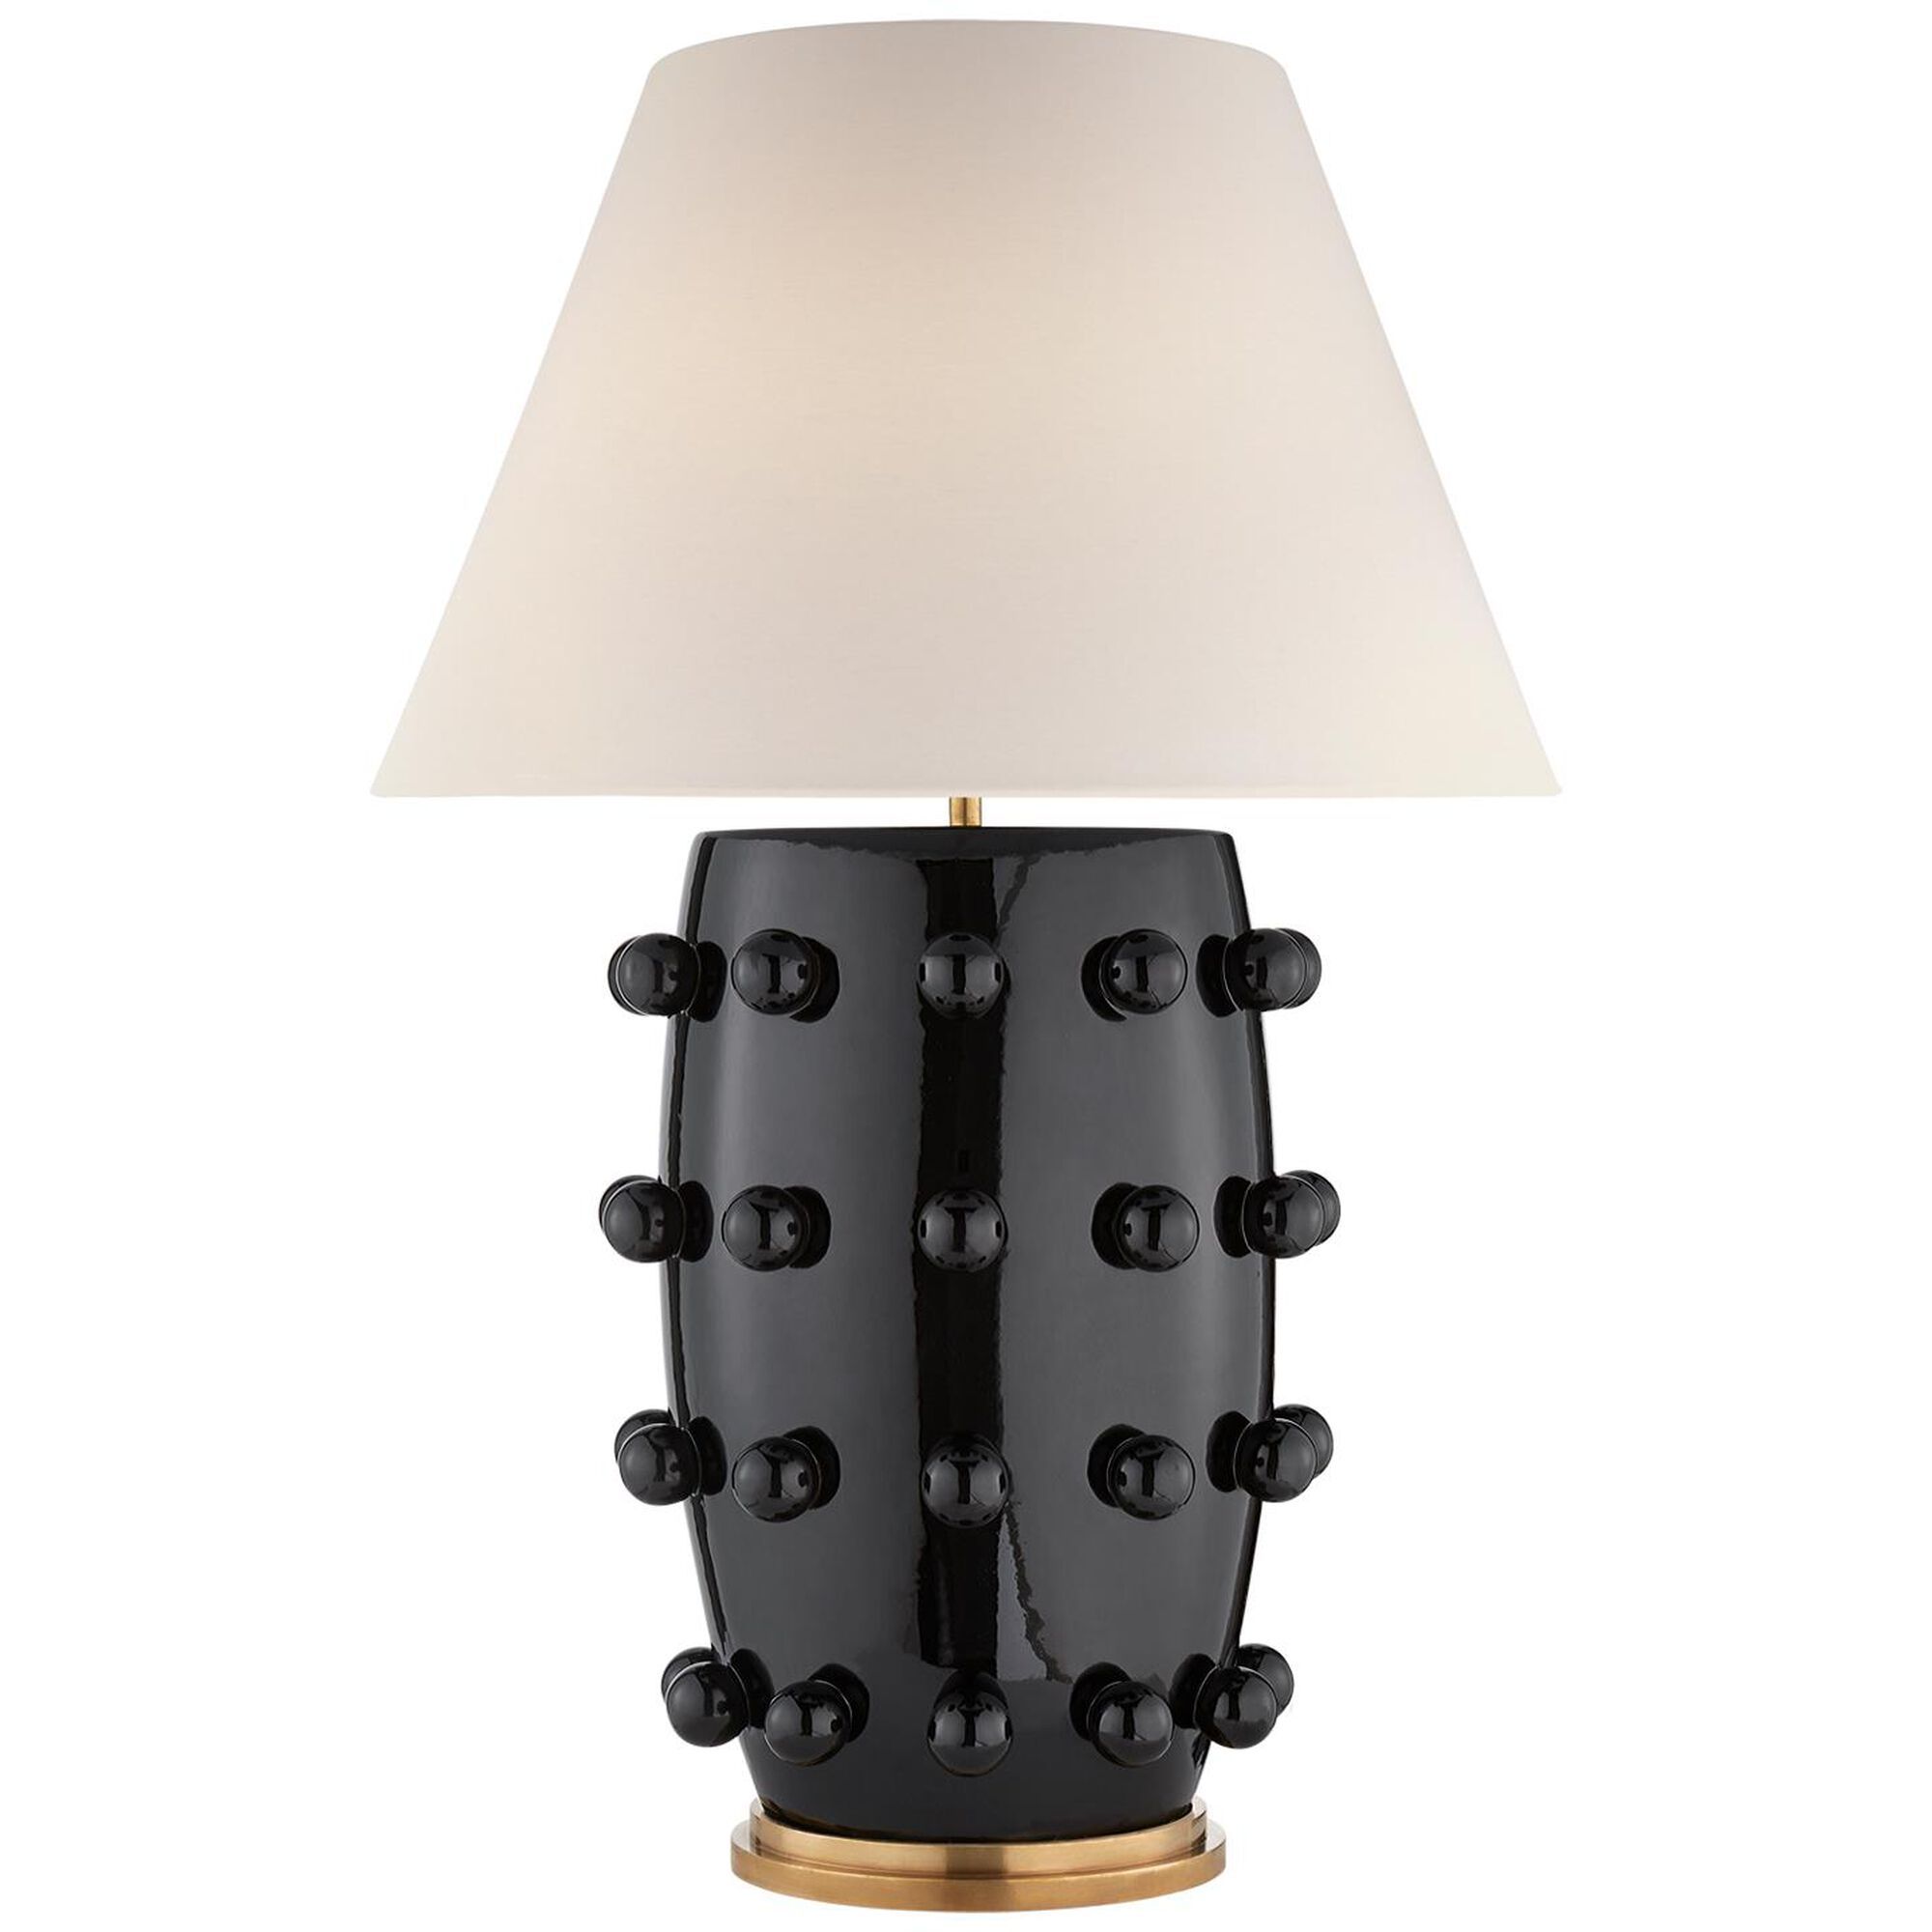 Kelly Wearstler Linden 34 Inch Table Lamp by Visual Comfort and Co. | Capitol Lighting 1800lighting.com